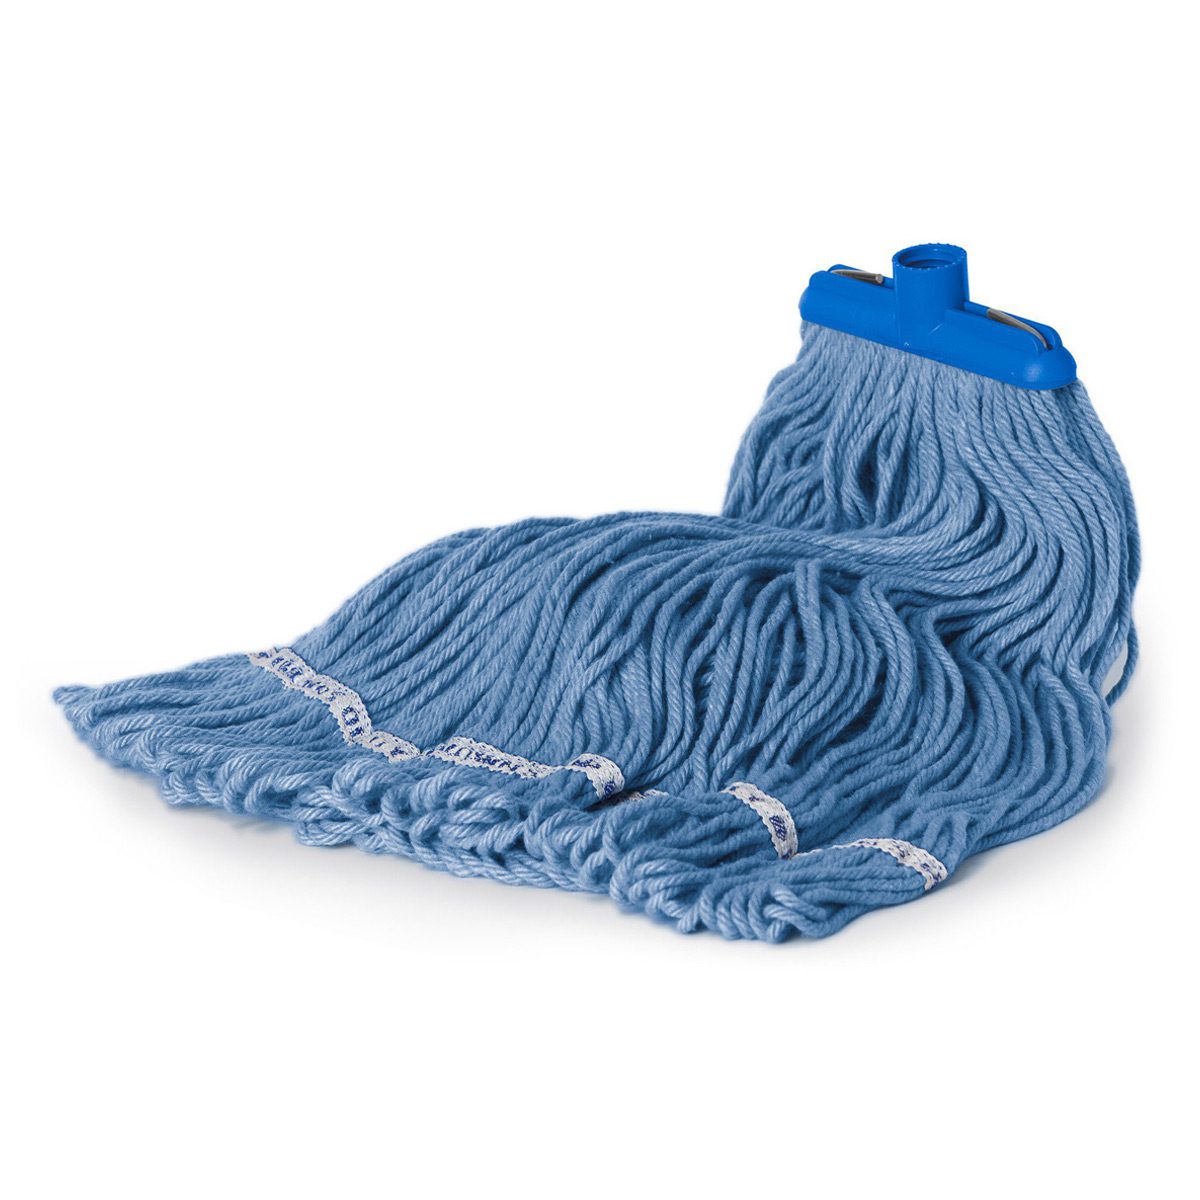 cleaning-equipment-mops-anti-tangle-mop -head-400gm-loop-anti-tangle-mop-head-only.-synthetic-blend-material-screw-fit-plastic-top-vjs-distributors-RBAL483BSKU